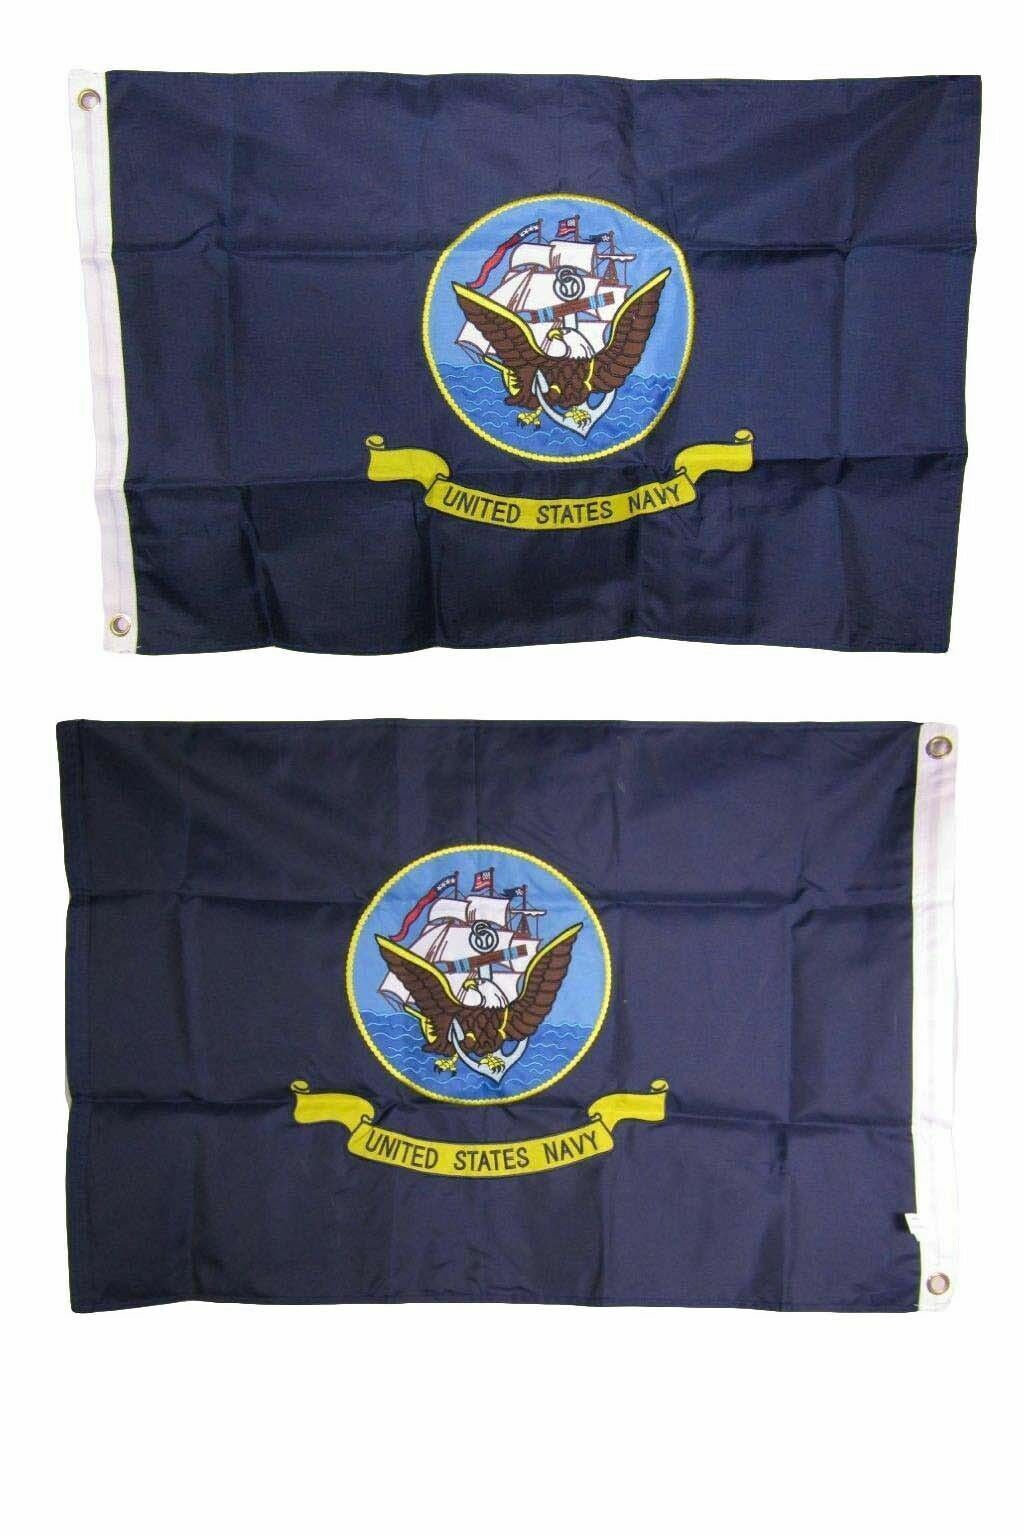 2x3 Embroidered U.S. Navy Ship Double Sided 210D Sewn Nylon Flag 2'x3' - $45.99